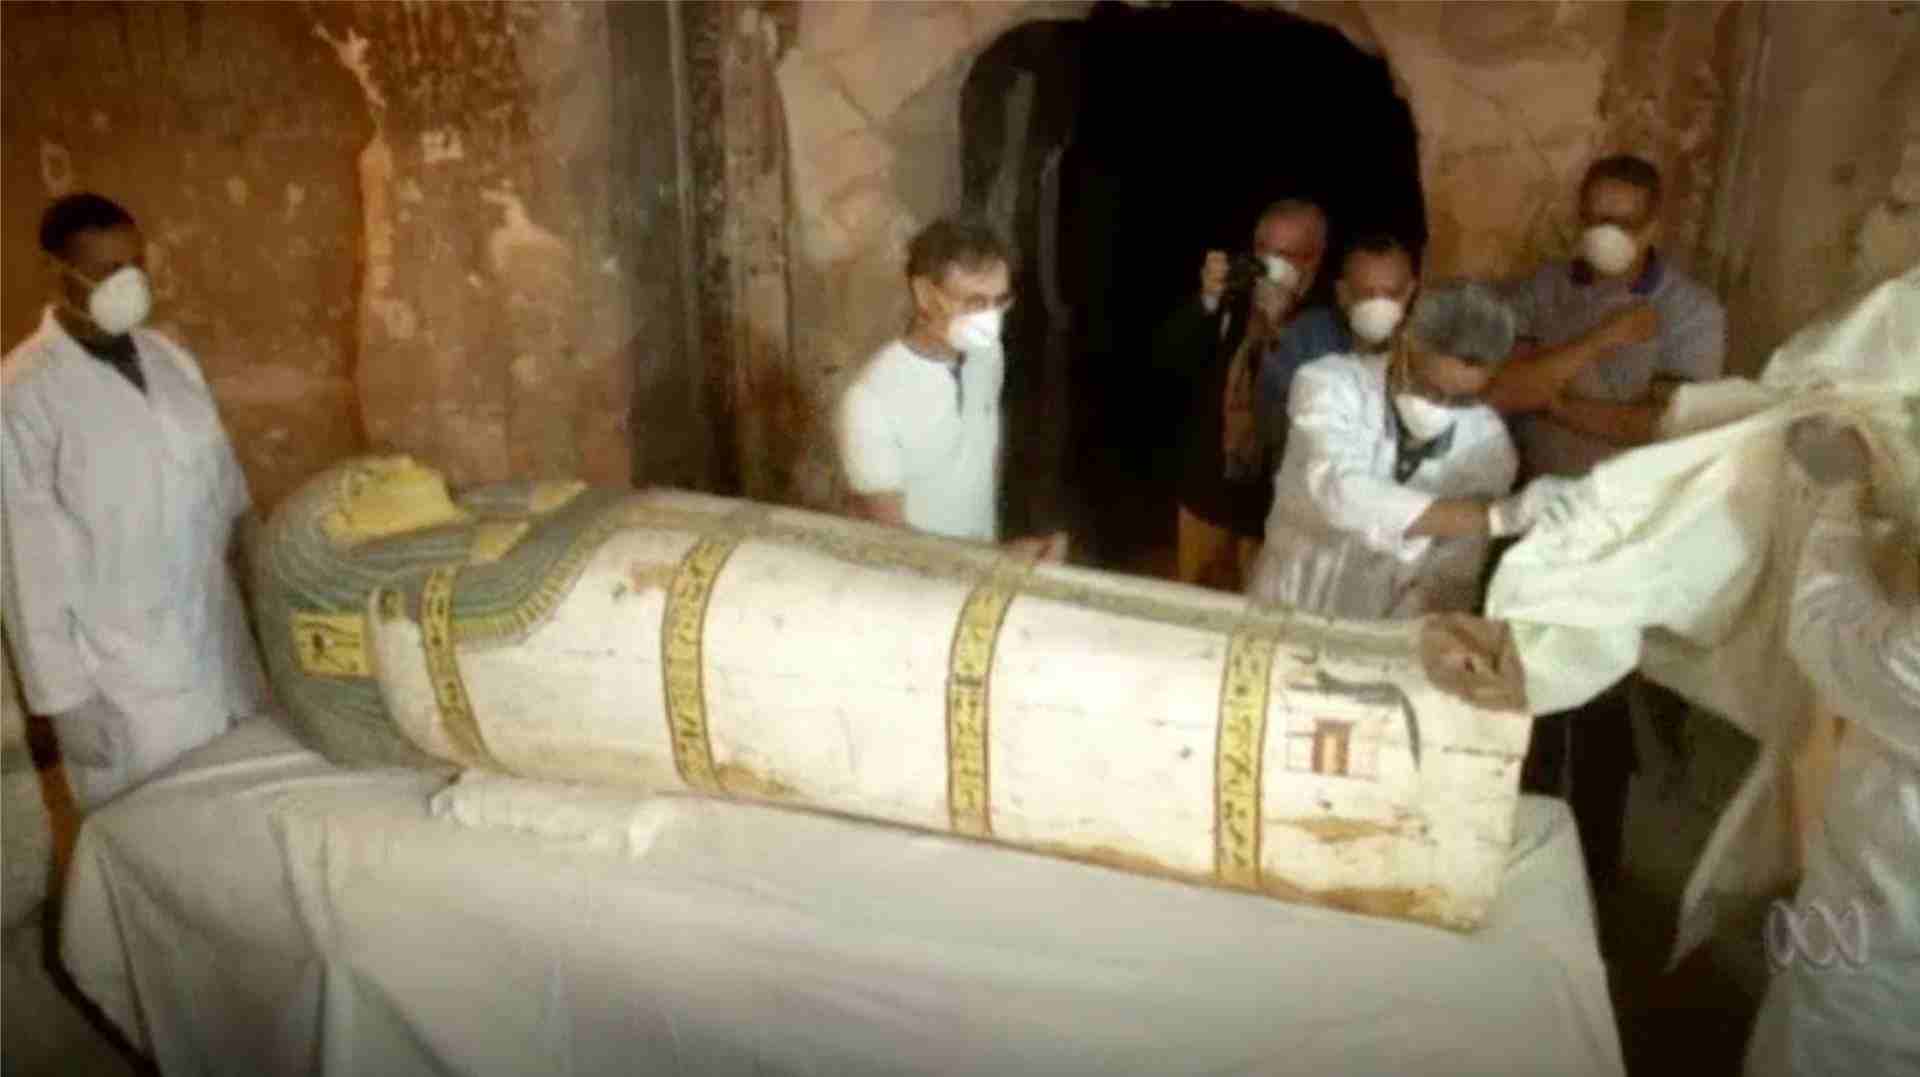 Egypt Discovers a New Mummy